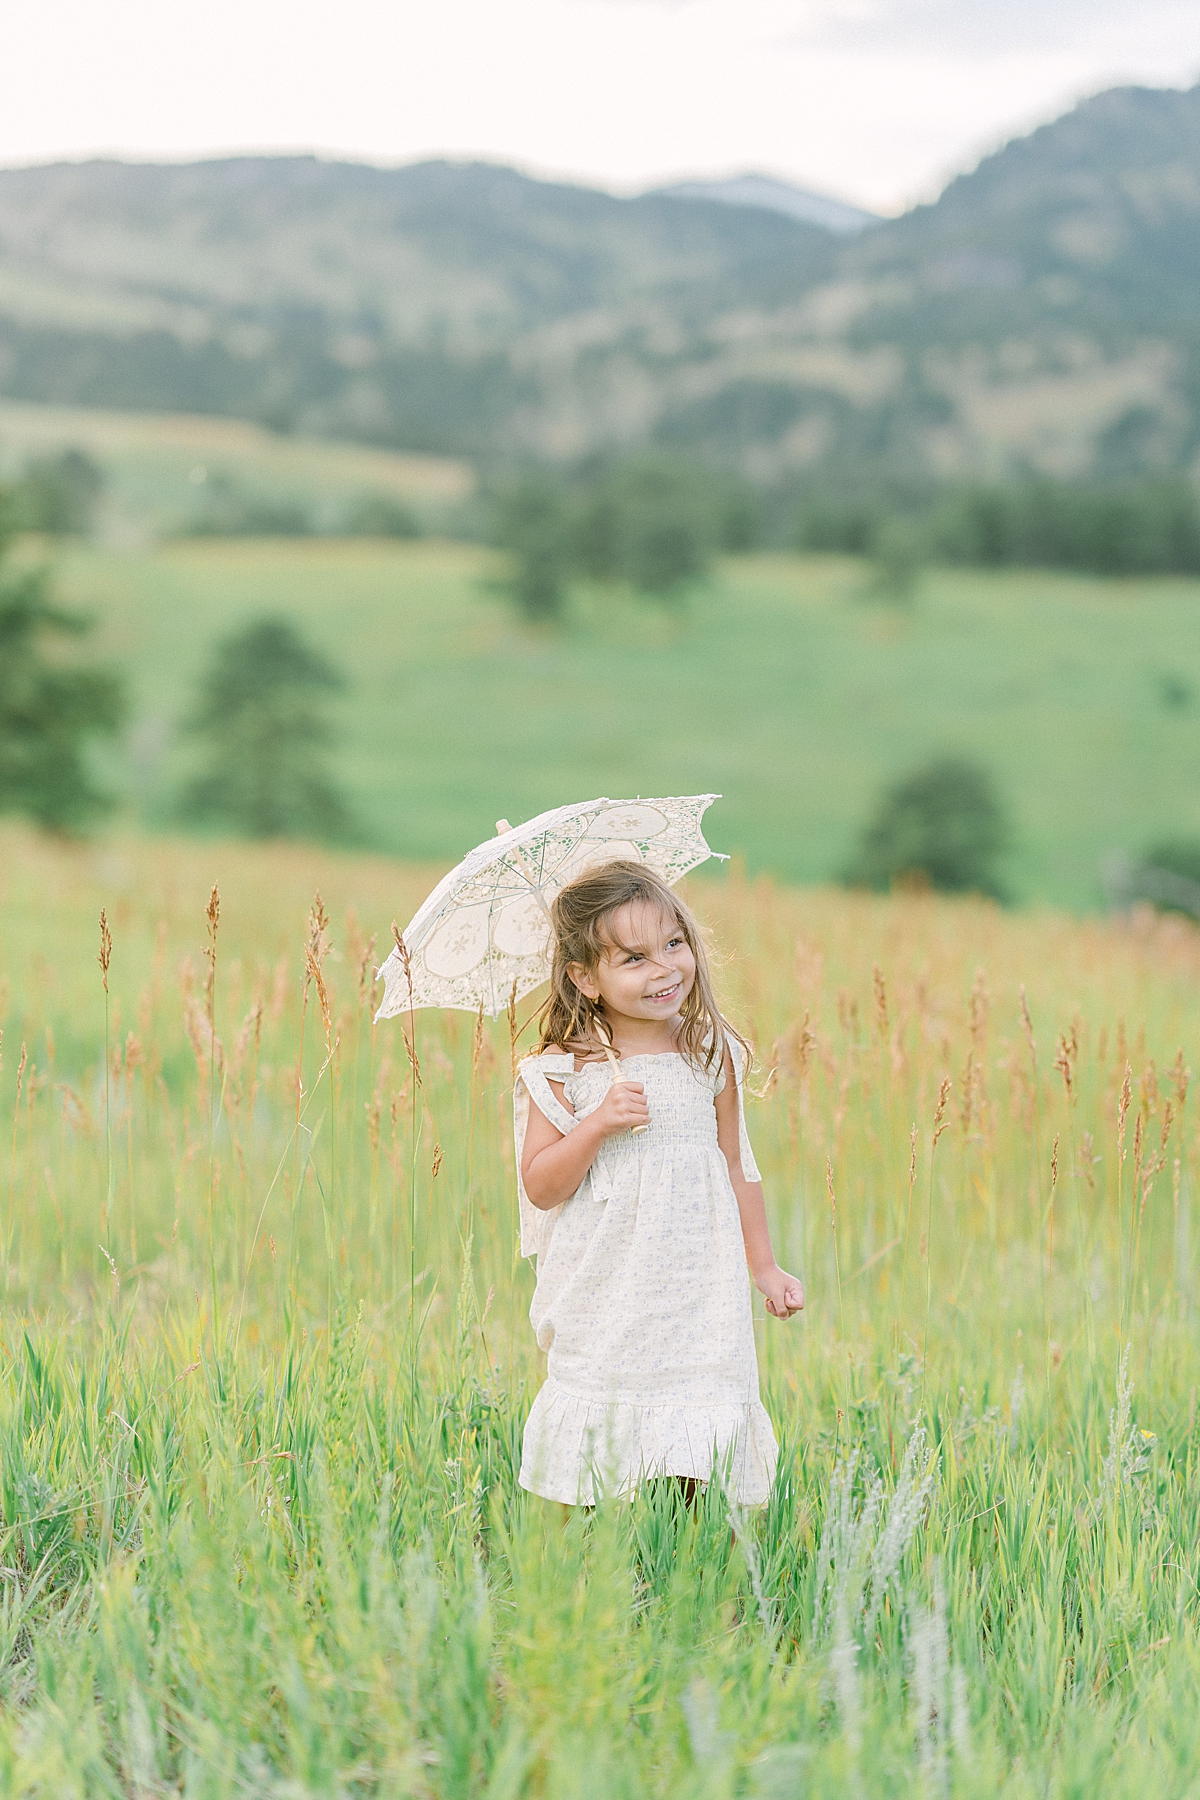 A cute little girl spins with a parasol in the mountains.